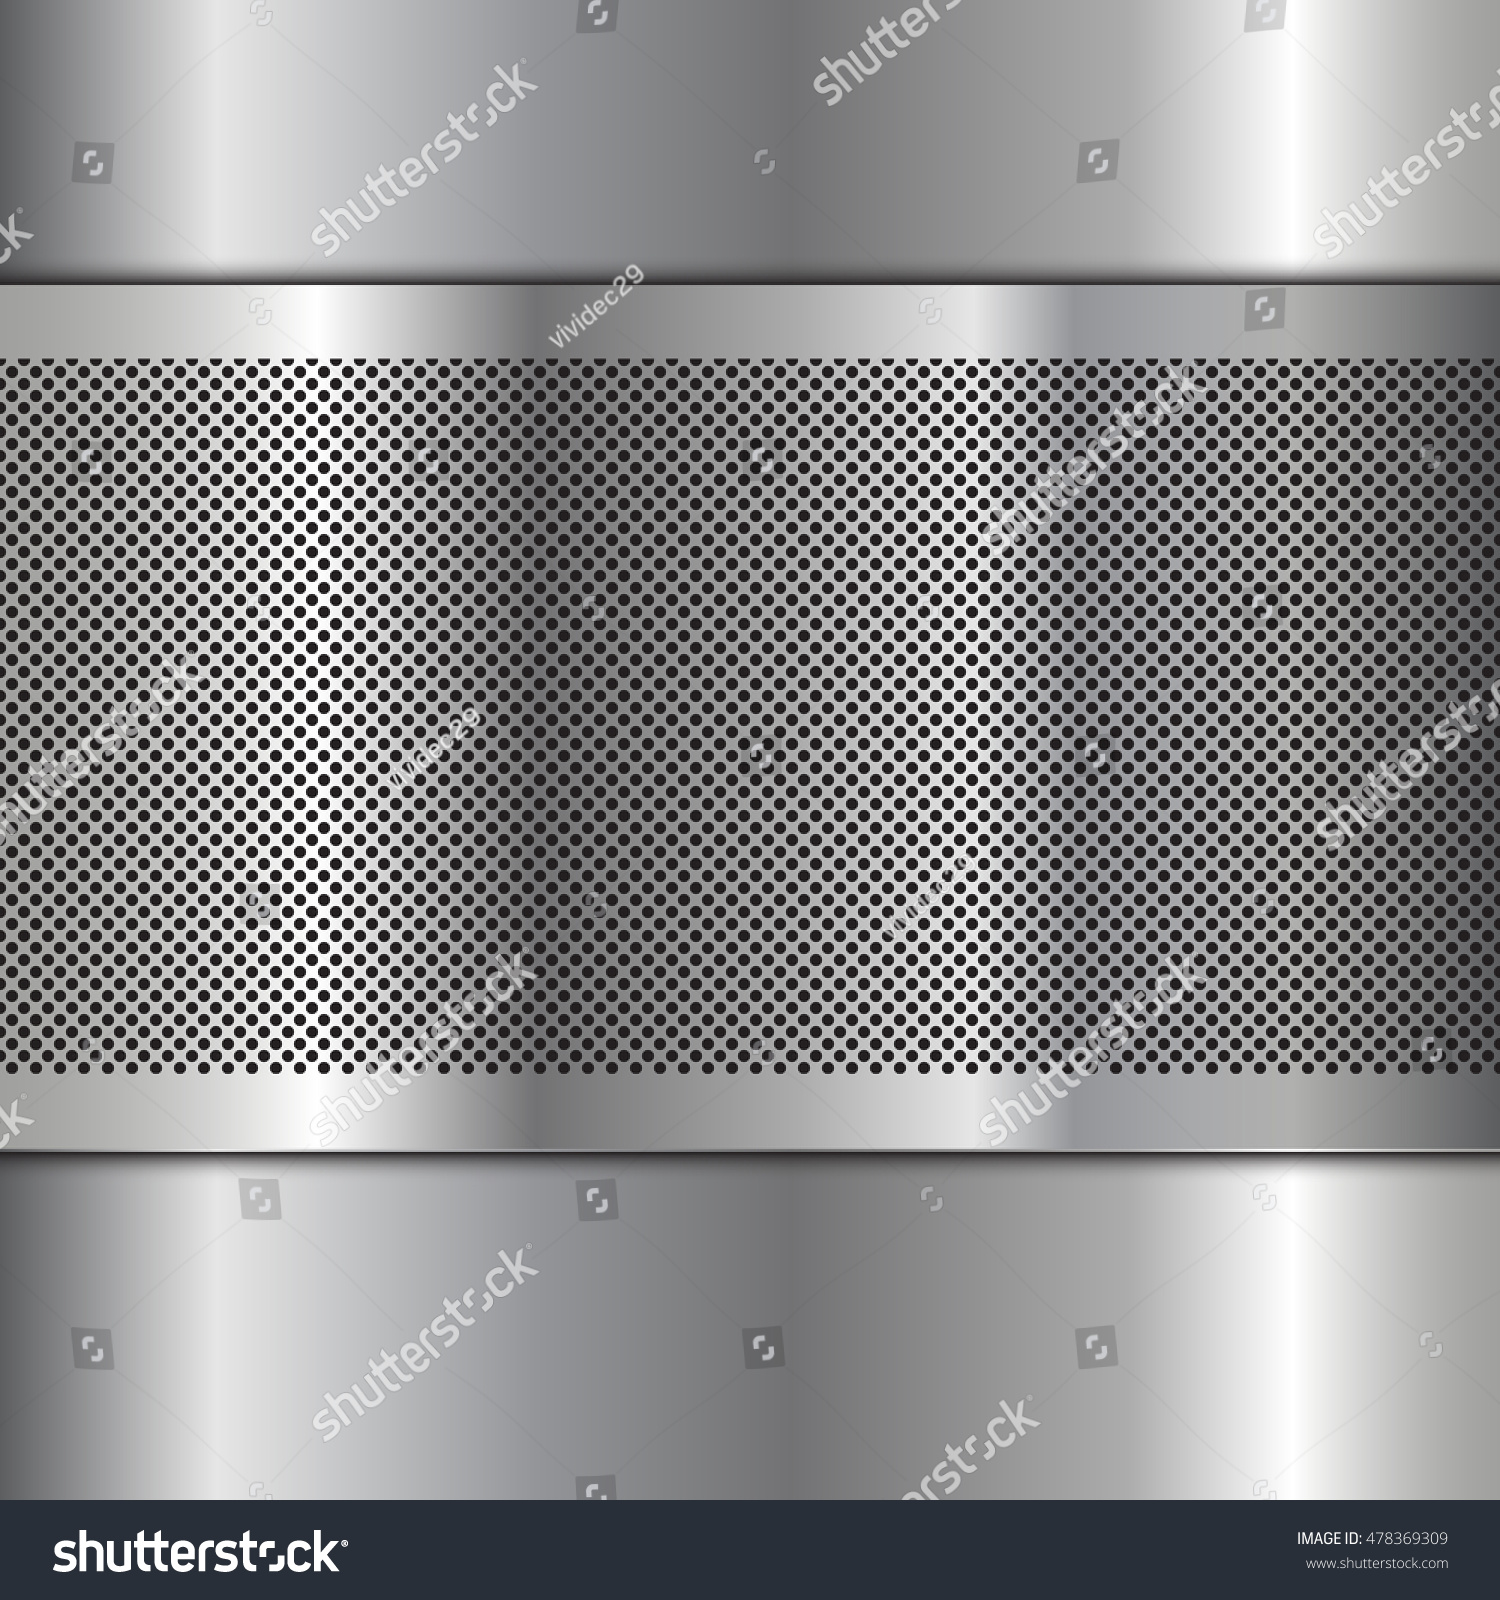 Stainless Steel Metal Plate Perforated Background Stock Photo (Photo ...